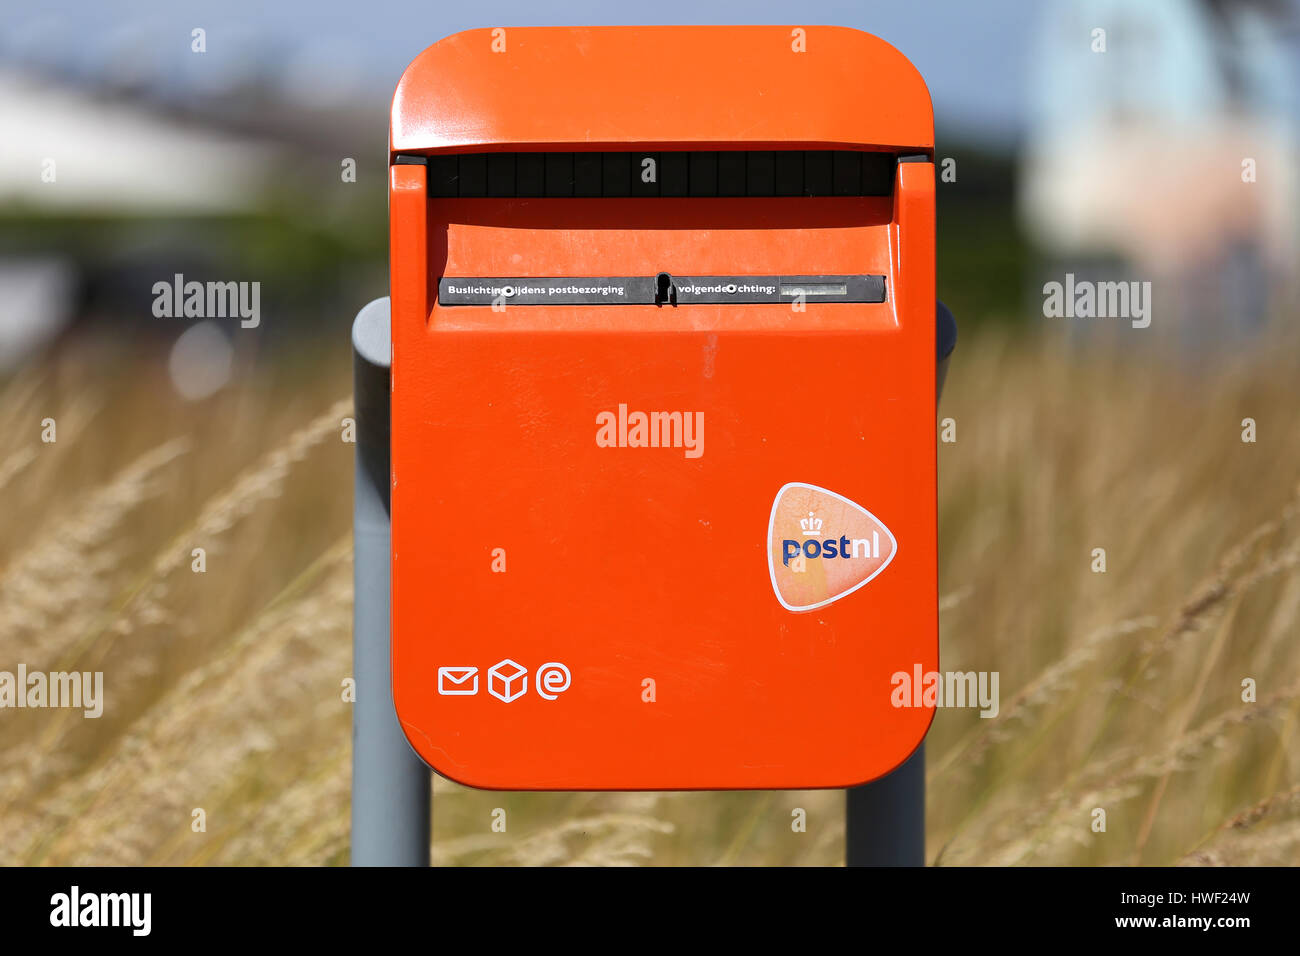 PostNL Mailbox. PostNL is a Dutch mail, parcel and e-commerce corporation and listed at Euronext Amsterdam. Stock Photo